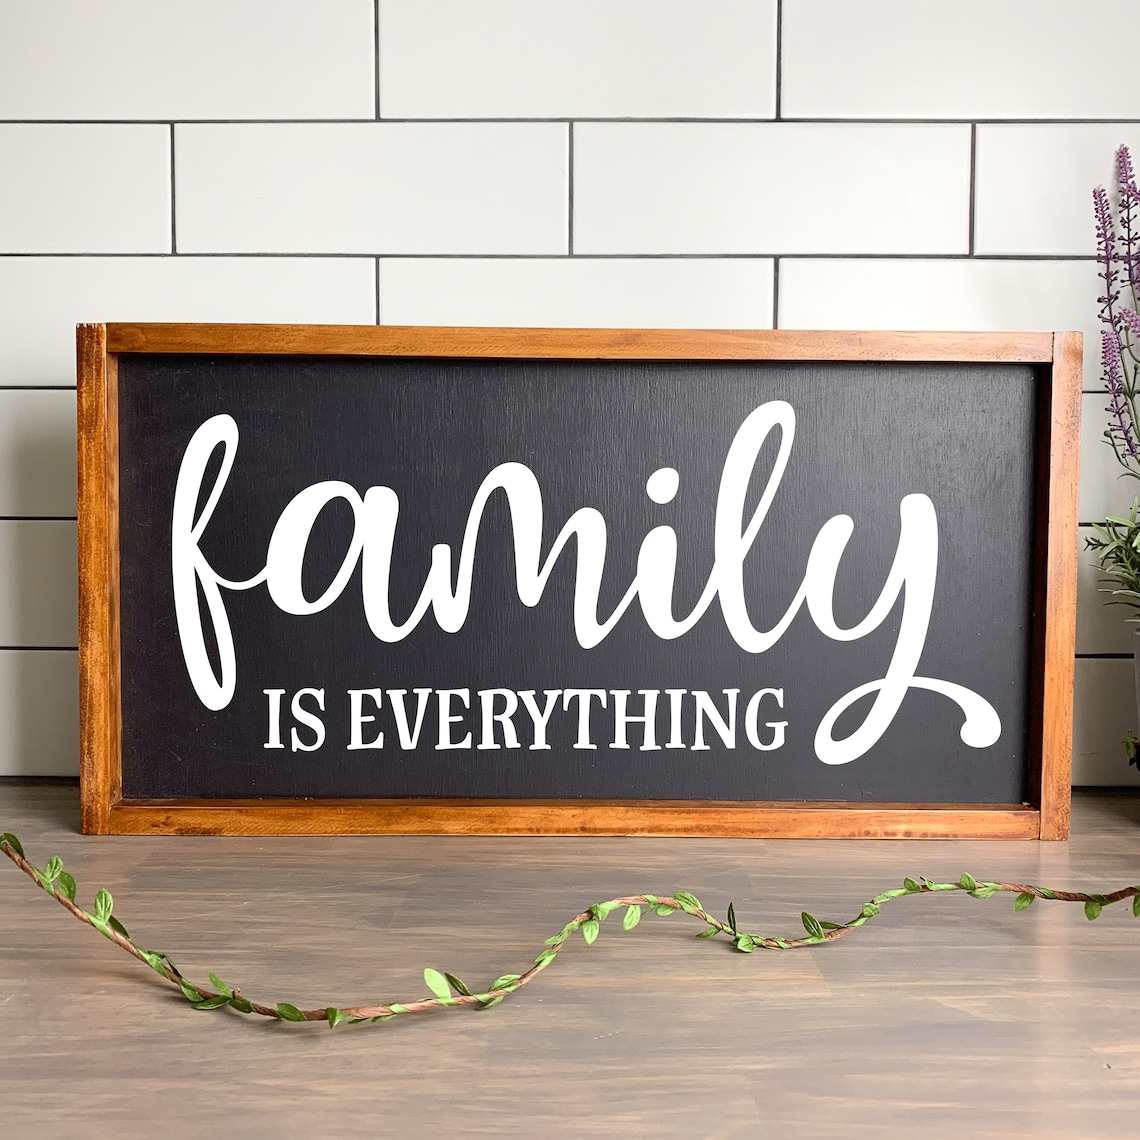 Family is Everything Framed Wood Sign 32x64cm uote Decor | Etsy